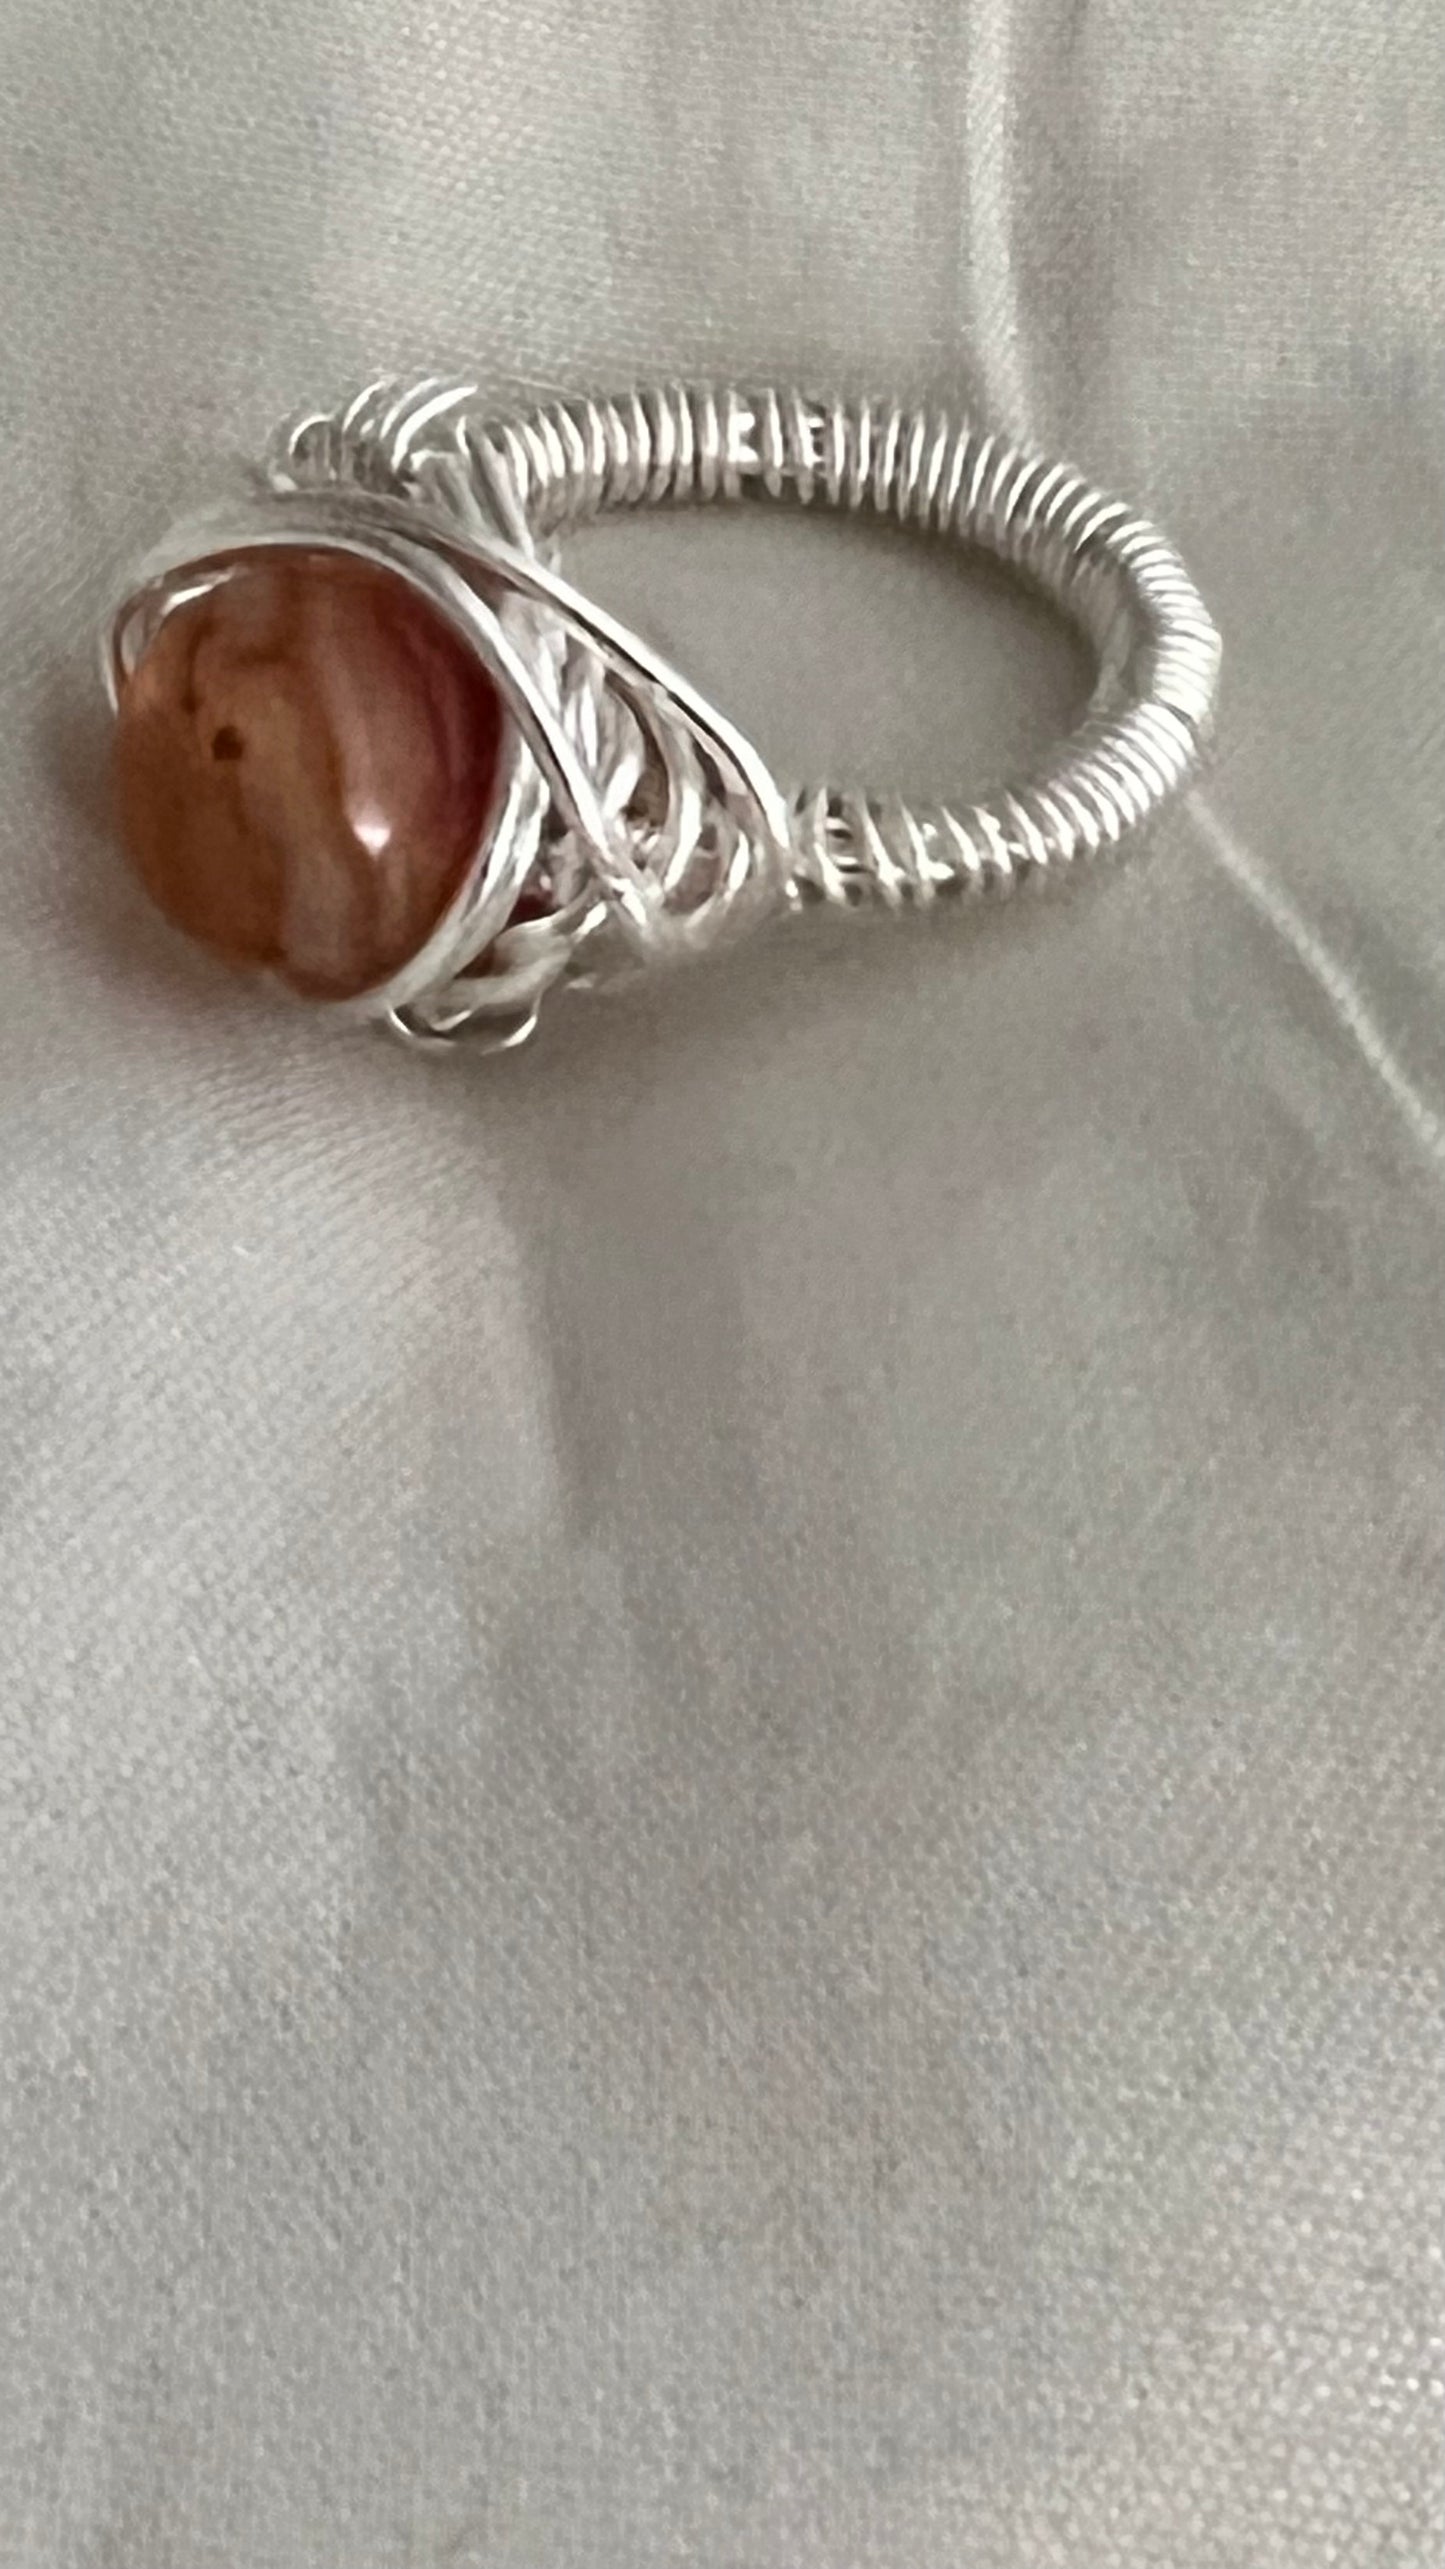 Carnelian Ring (size 5) restores vitality and motivation, and stimulates creativity